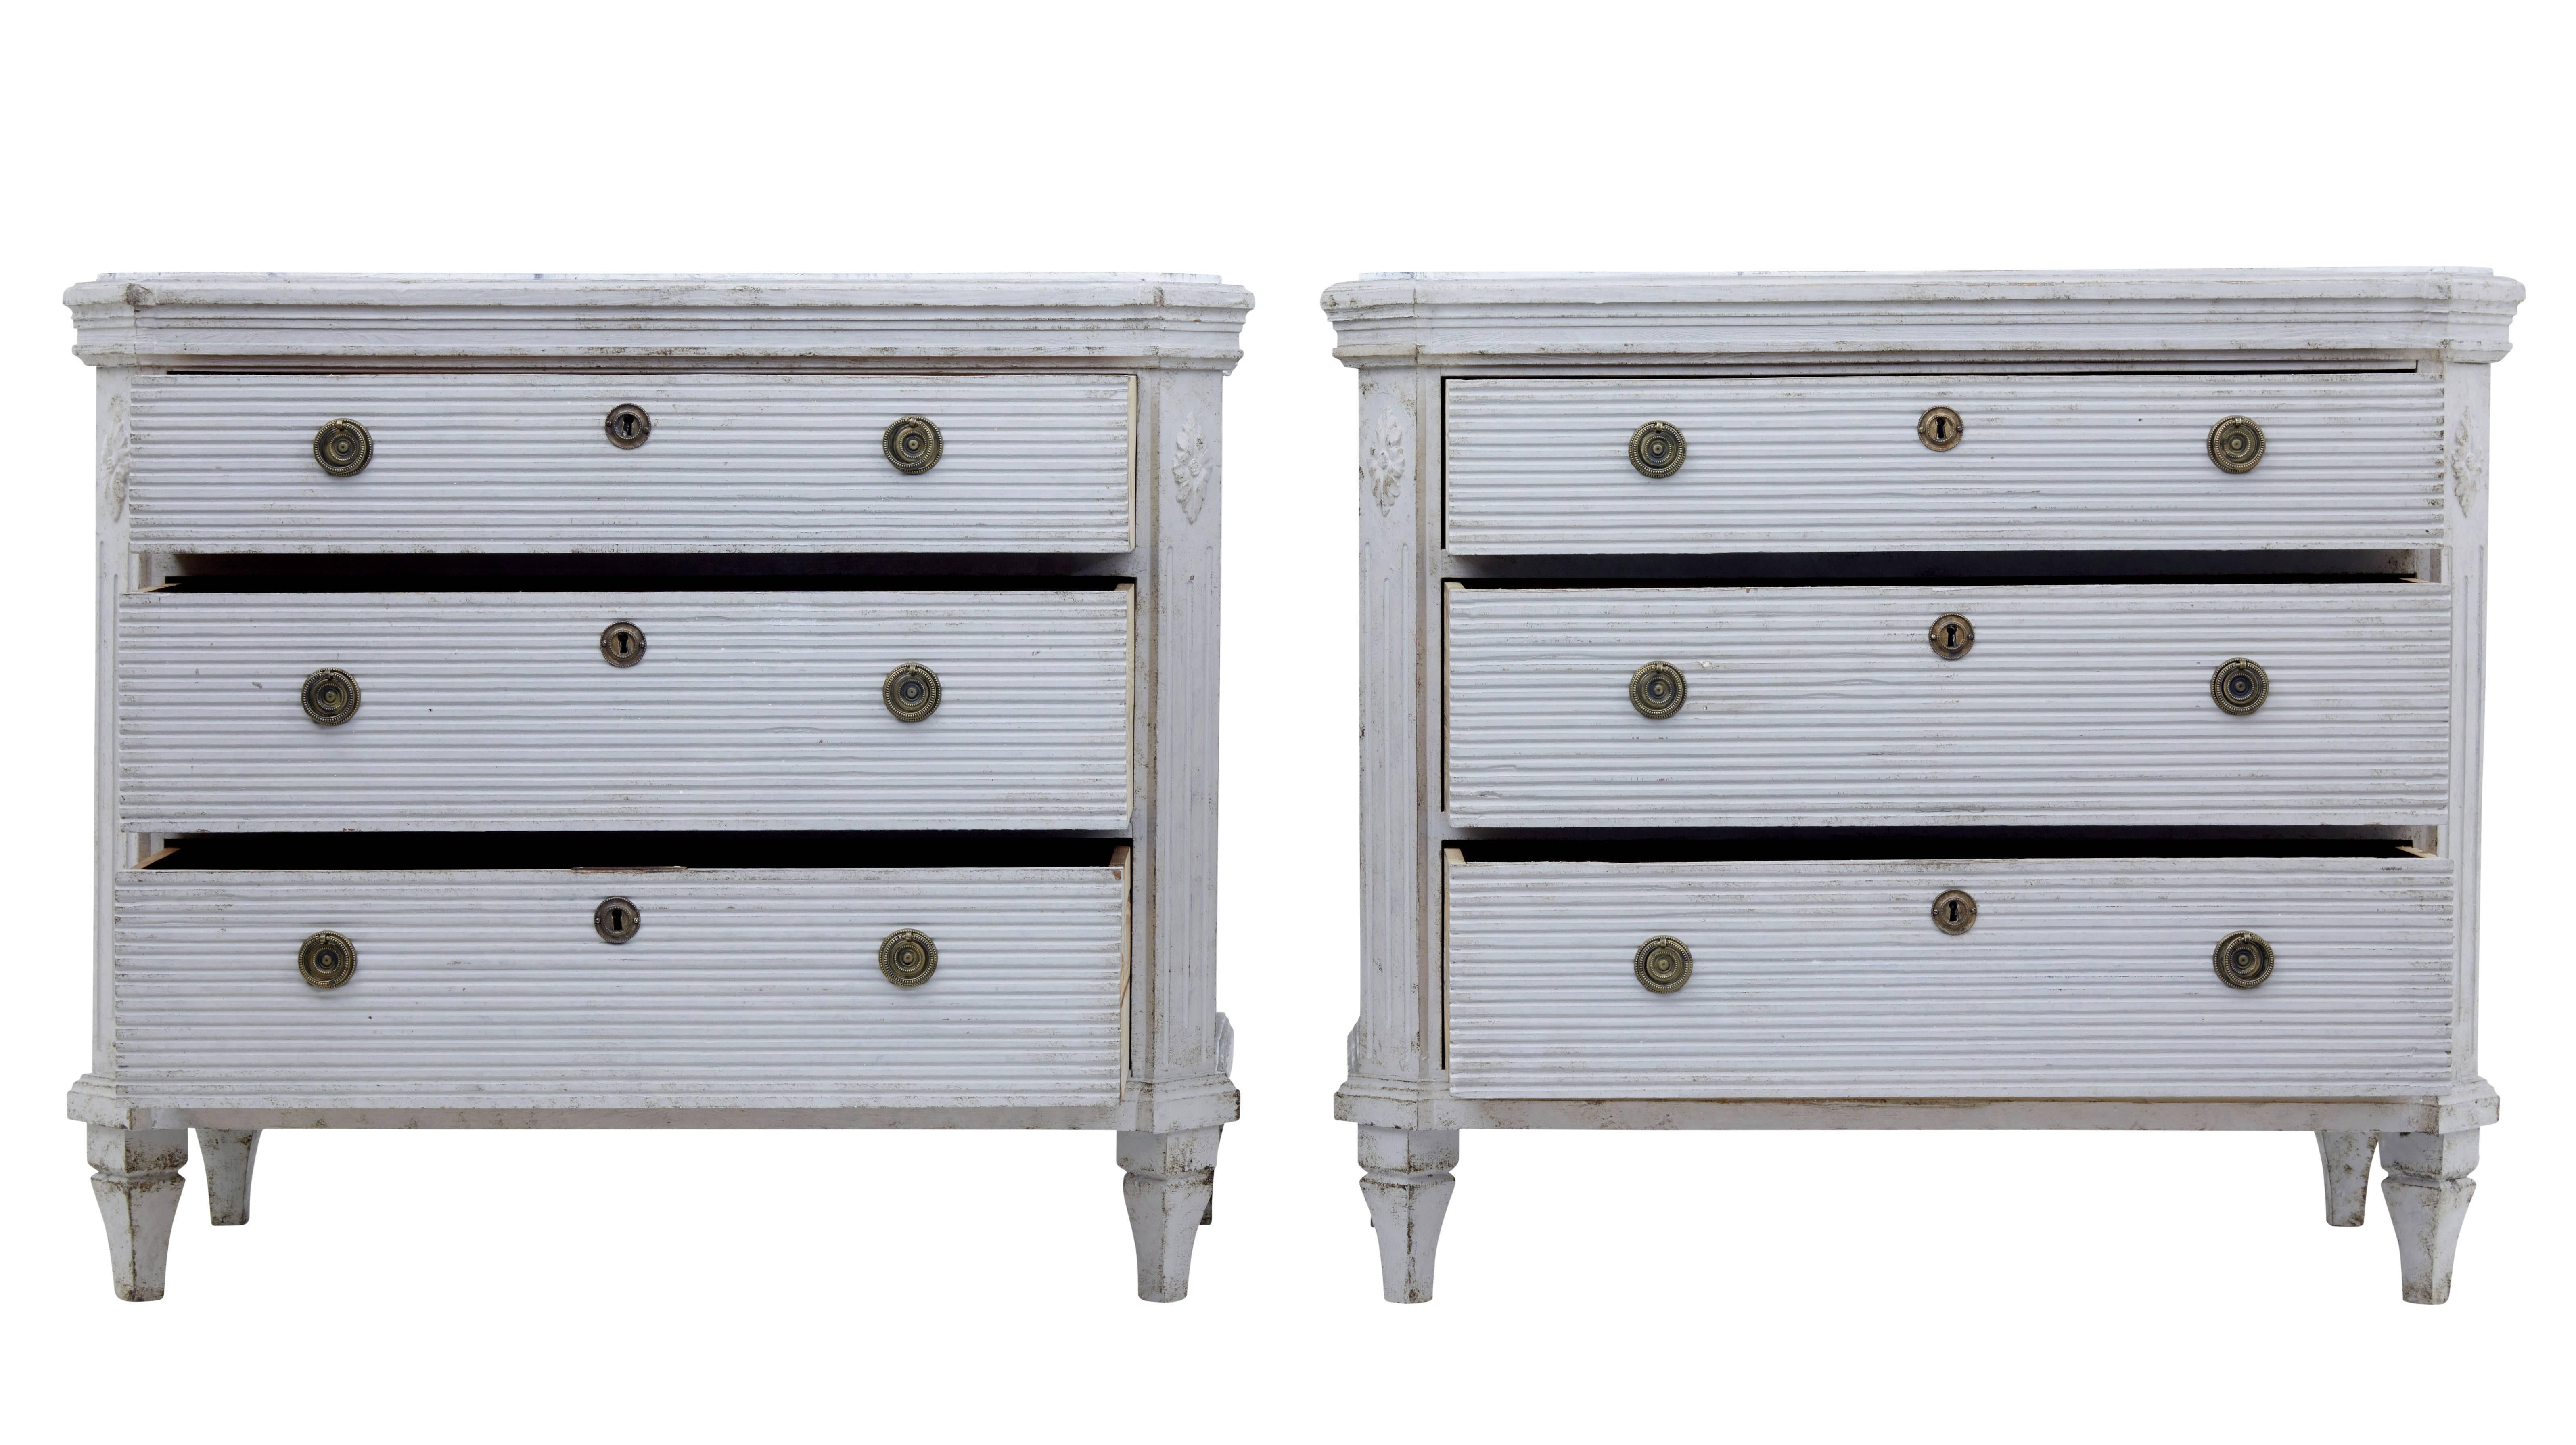 Fine pair of Gustavian influenced Swedish commodes, circa 1860.
Three drawers with fluted detailing to the front. Later brass ring handles.
Faux marble painted top. Later paint.
Measures: Height 30 1/4